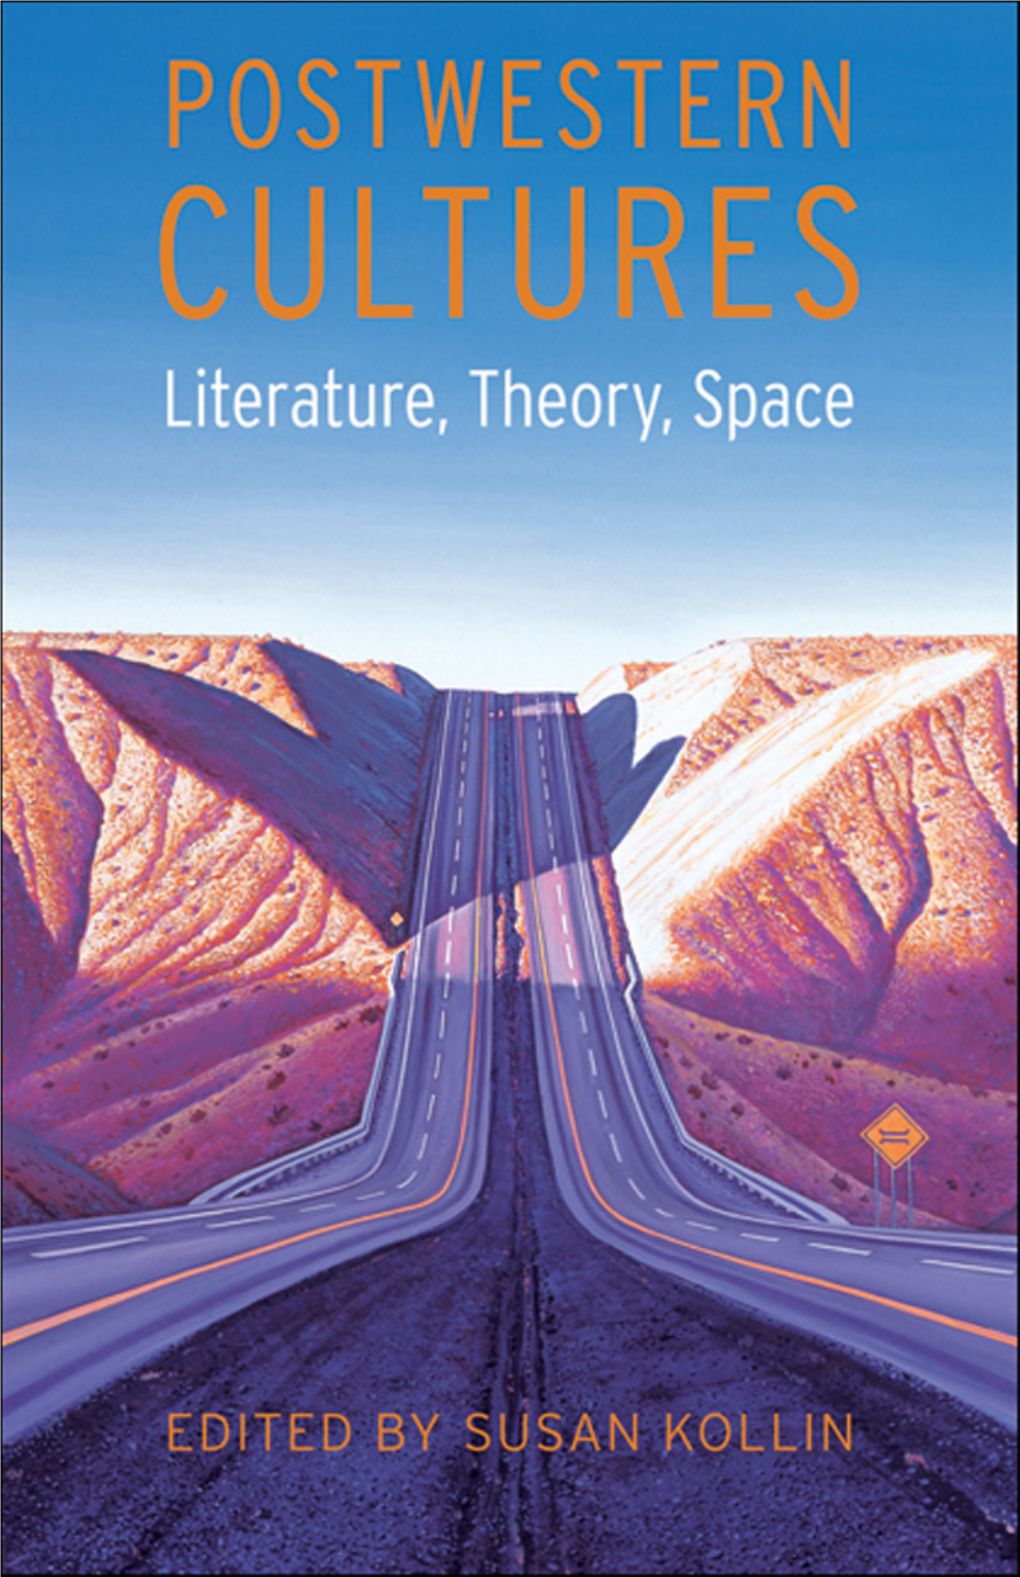 Postwestern Cultures: Literature, Theory, Space / Edited by Susan Kollin